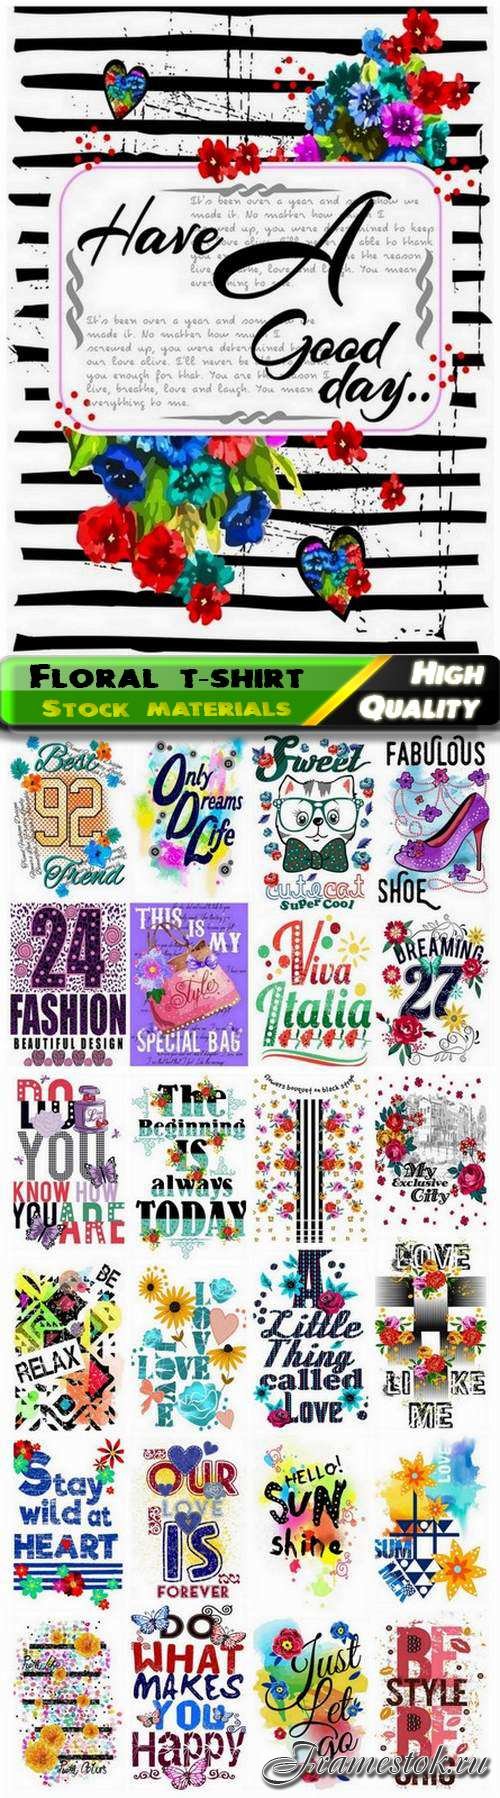 Floral t-shirt and fashion design for kids and children - 25 Eps